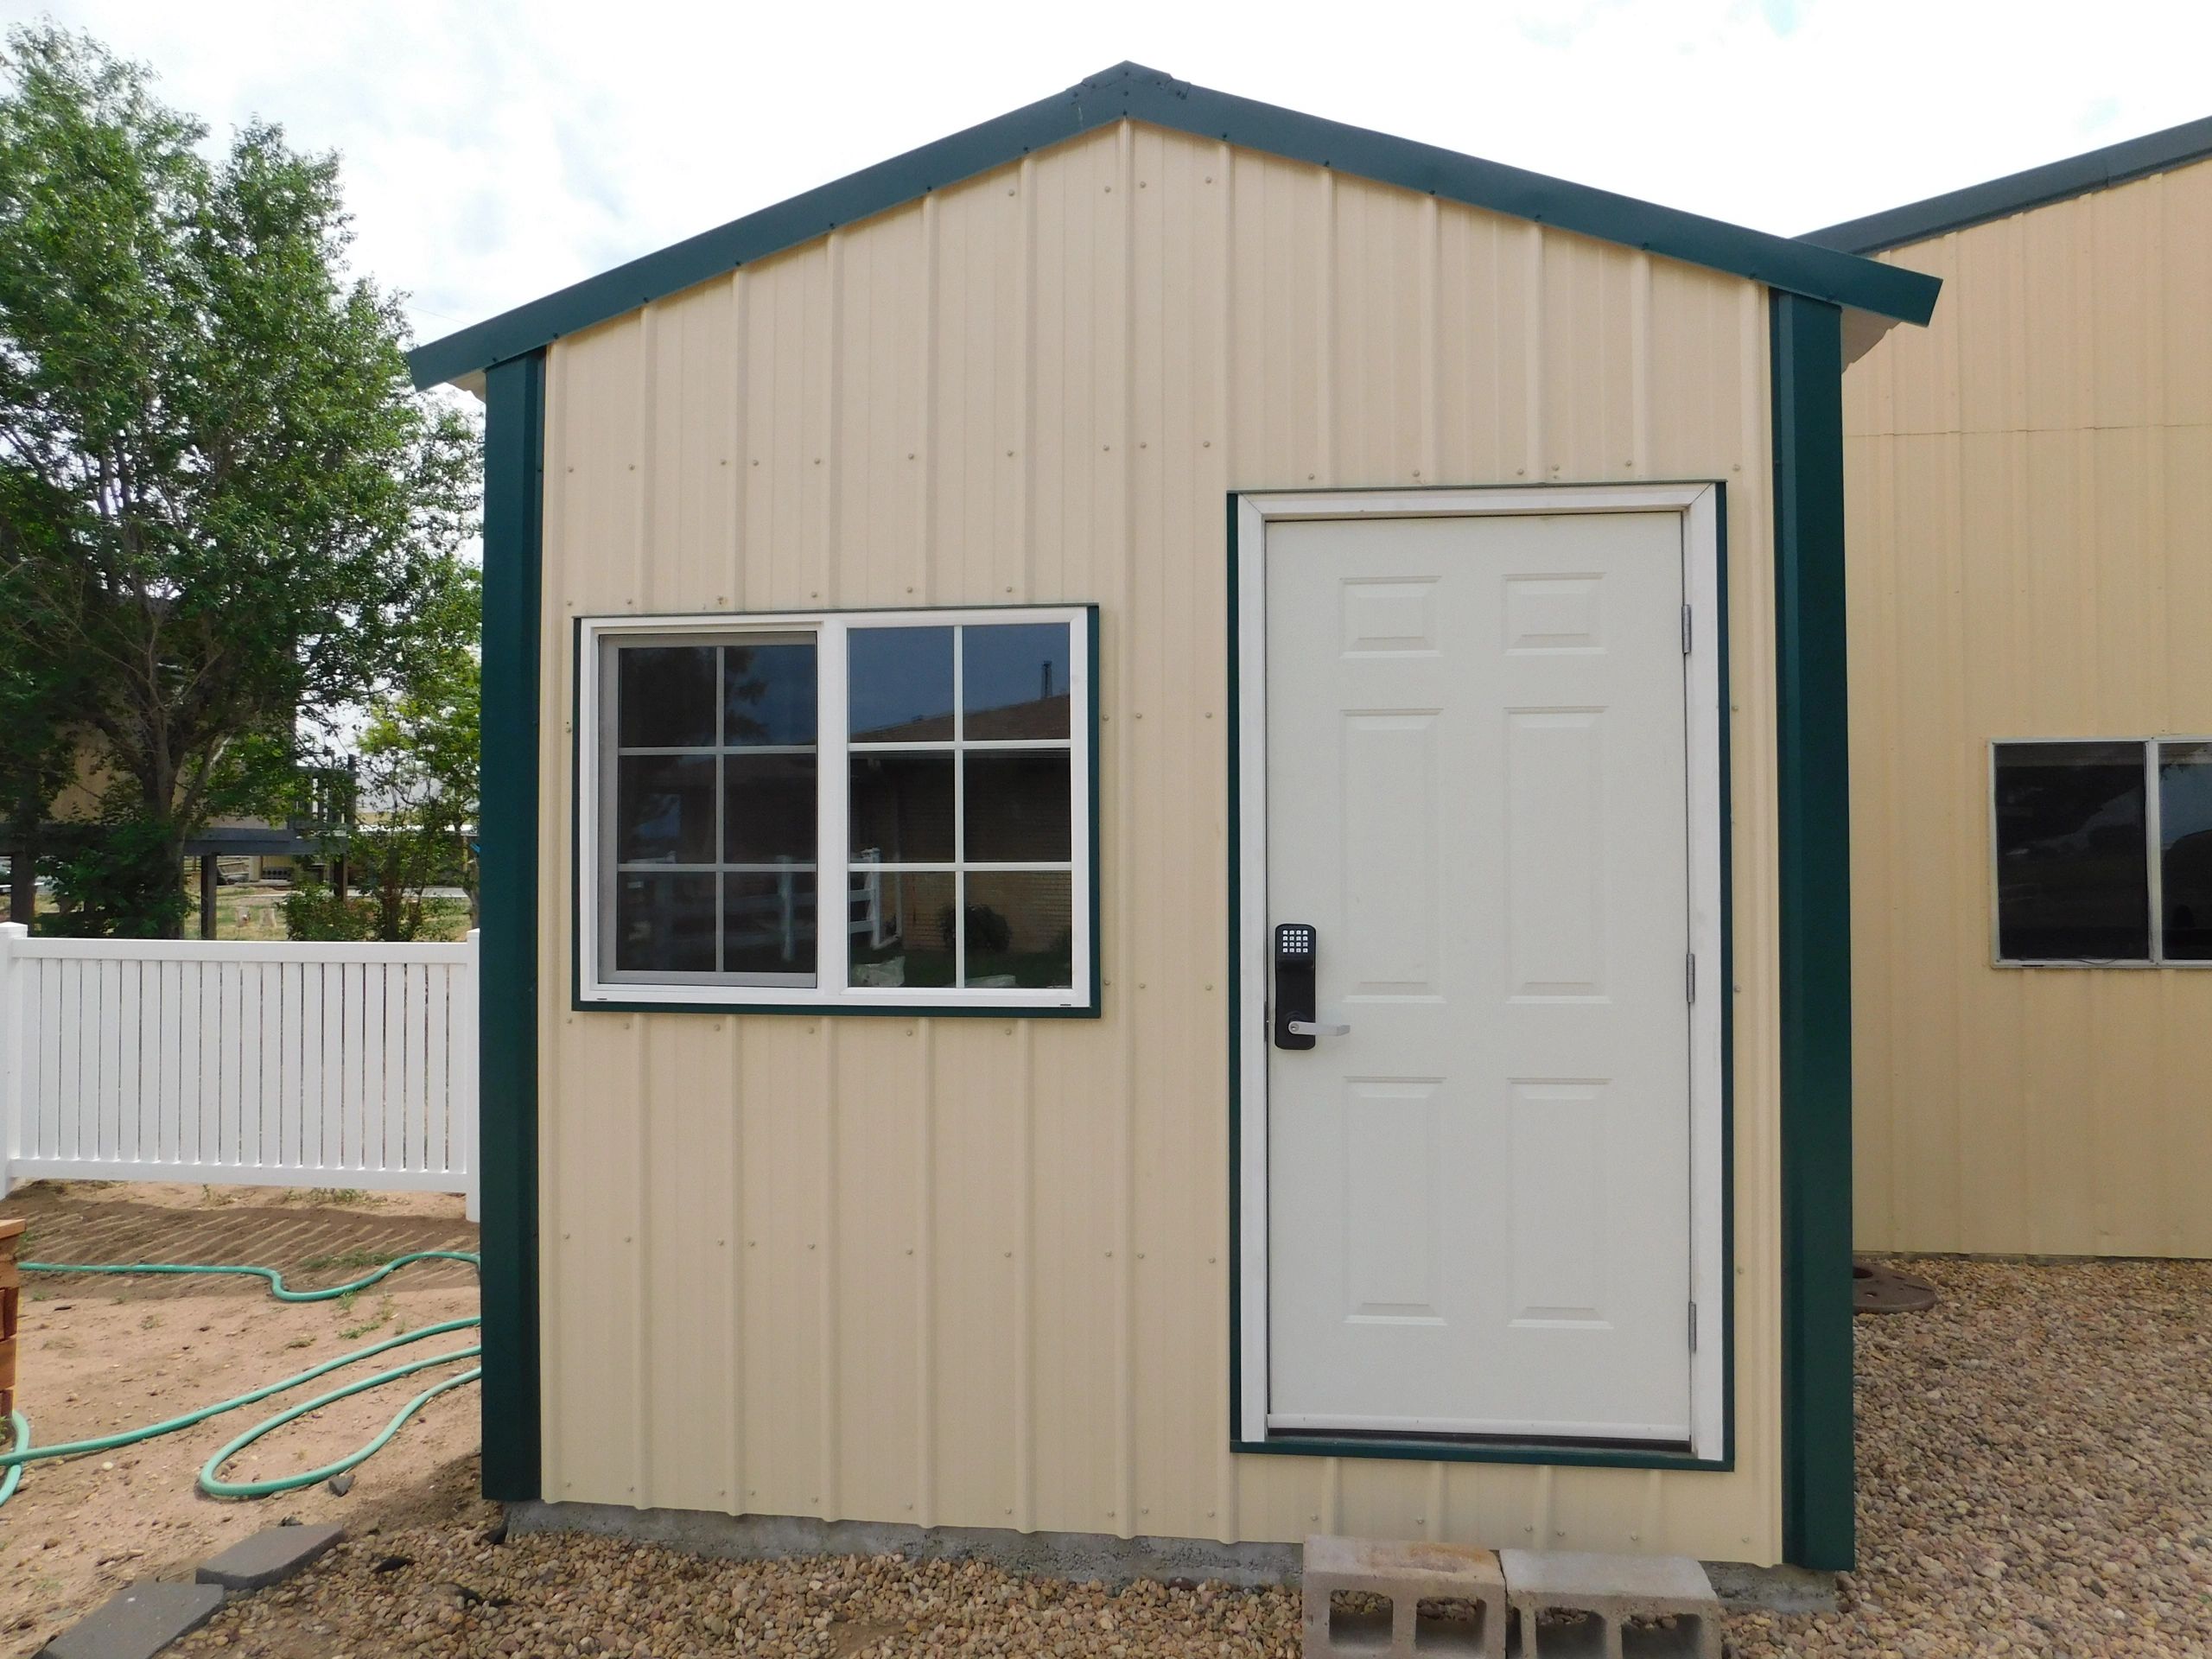 Wood framed shed with metal siding.
Includes a 3' door on the west side and a 4' roll up garage door